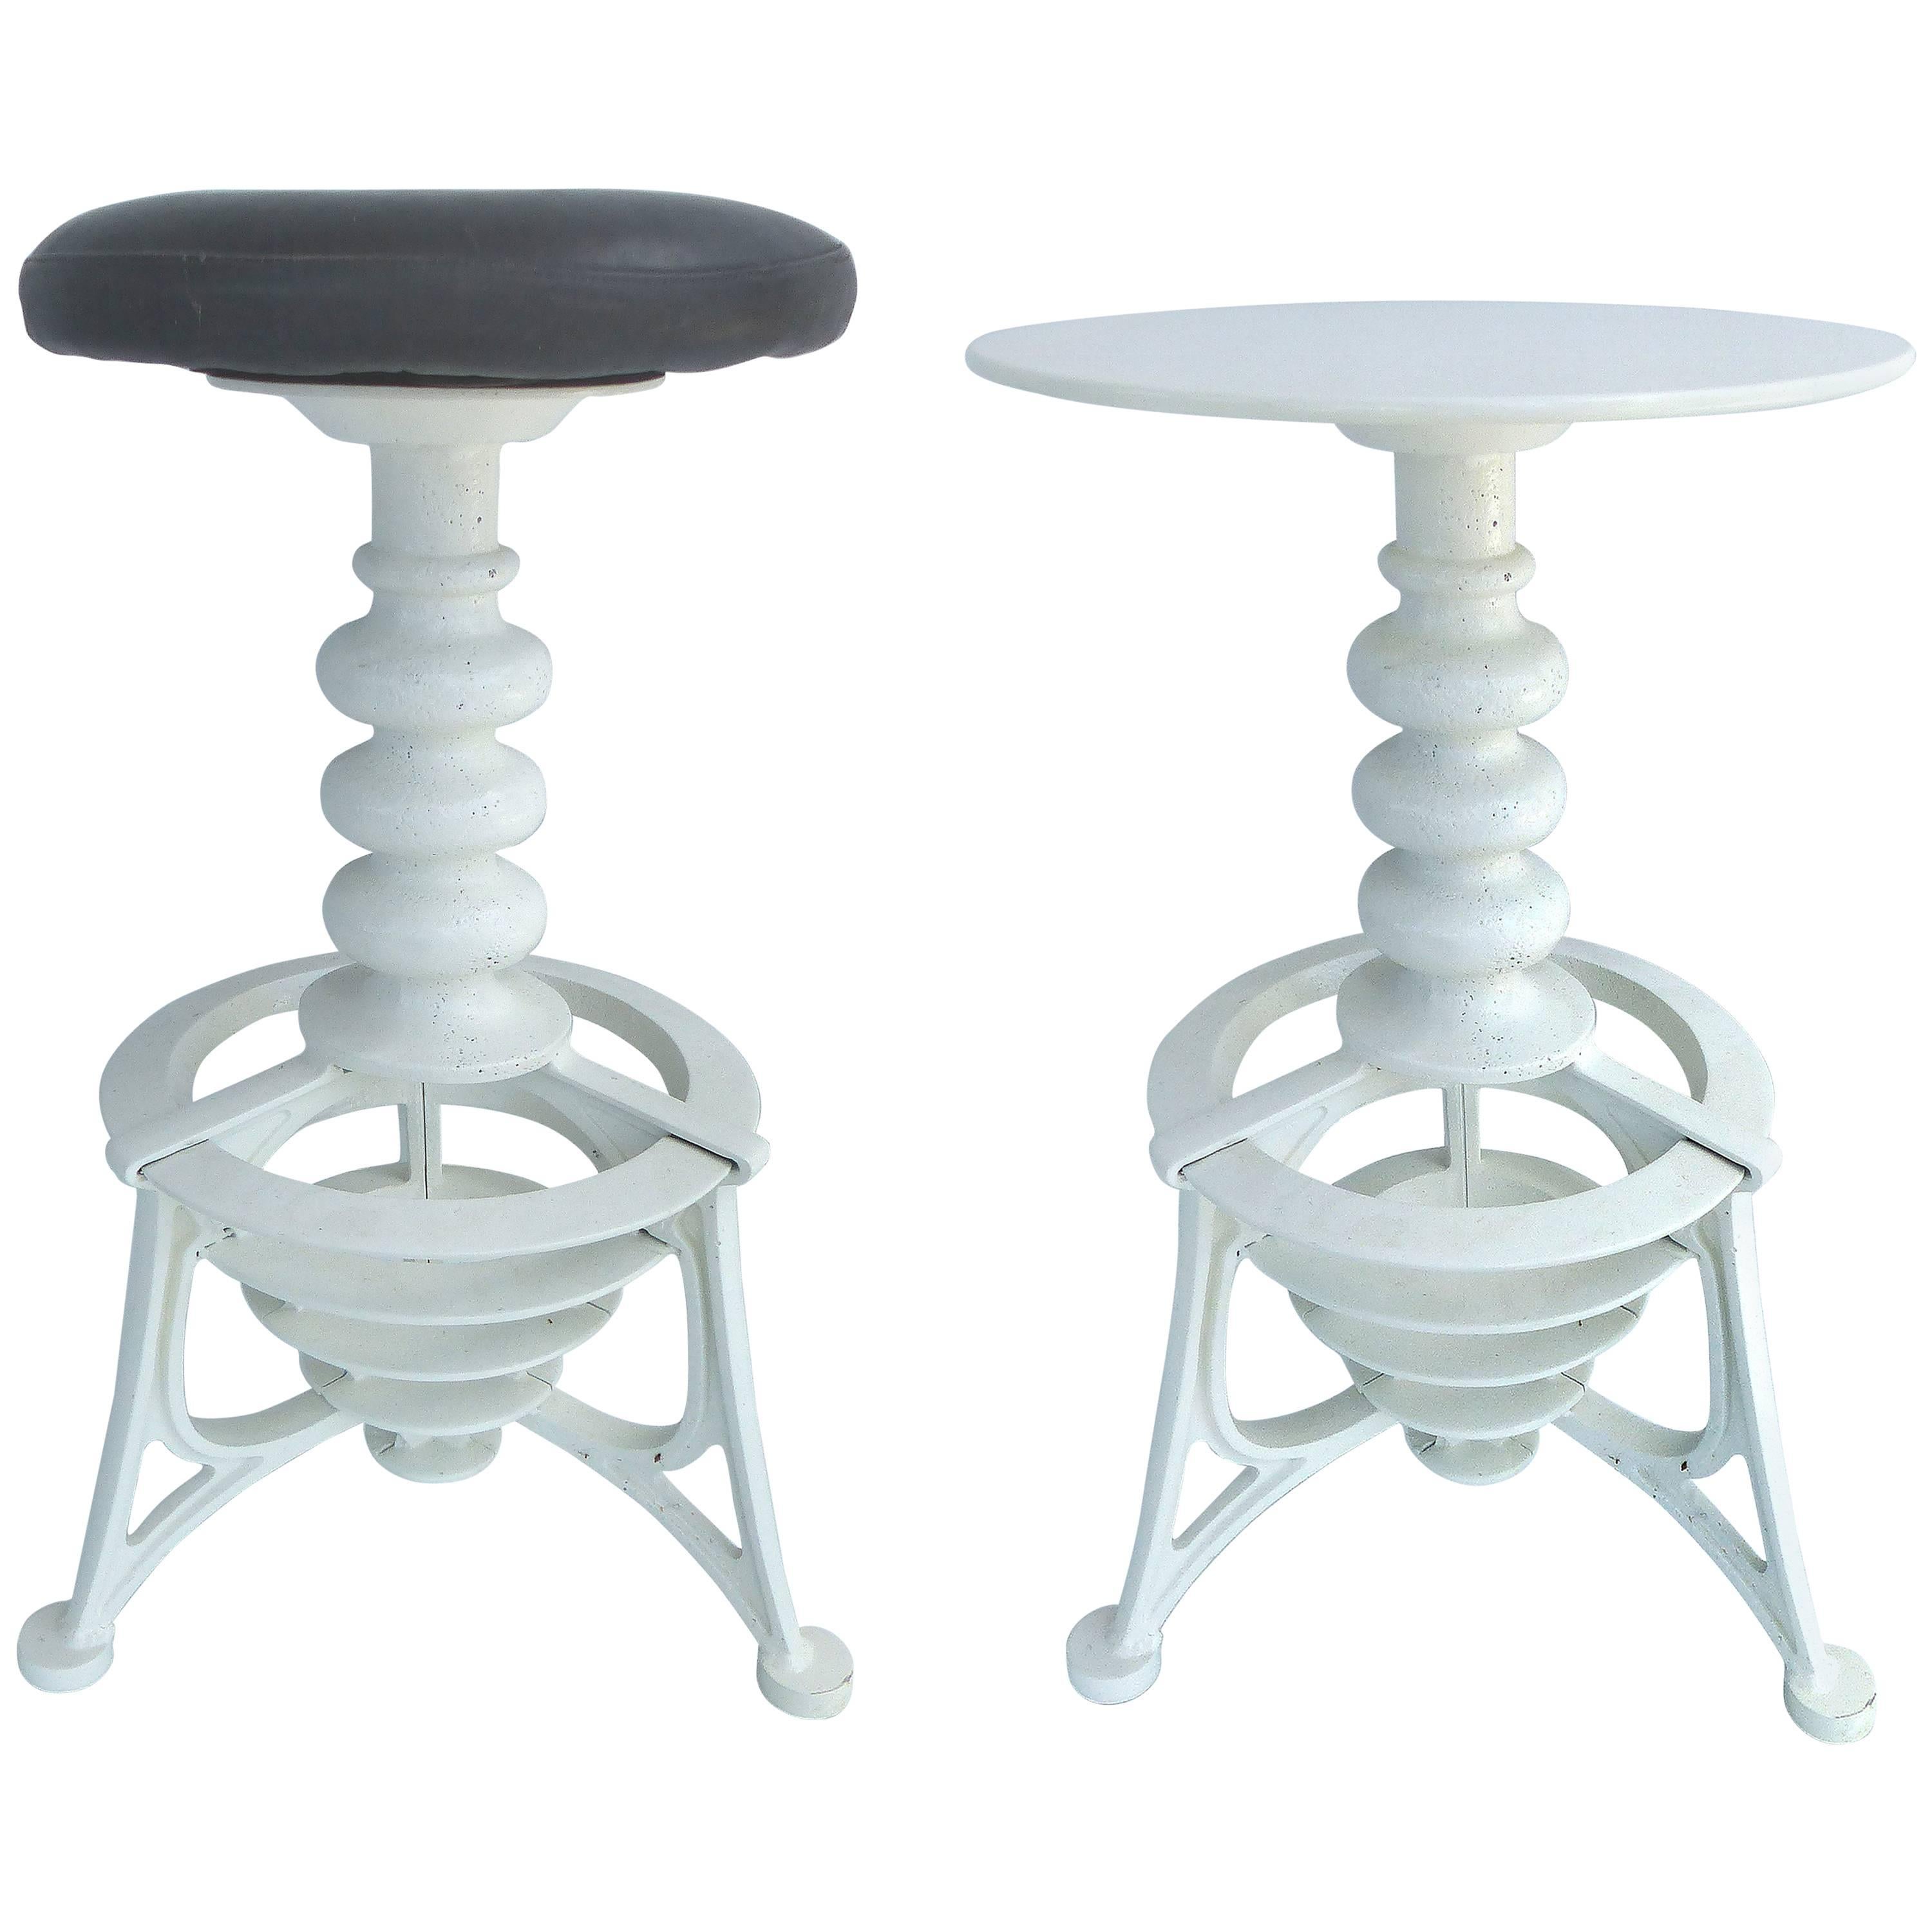 20th Century Industrial Cast Iron Interchangeable Stools to Tables